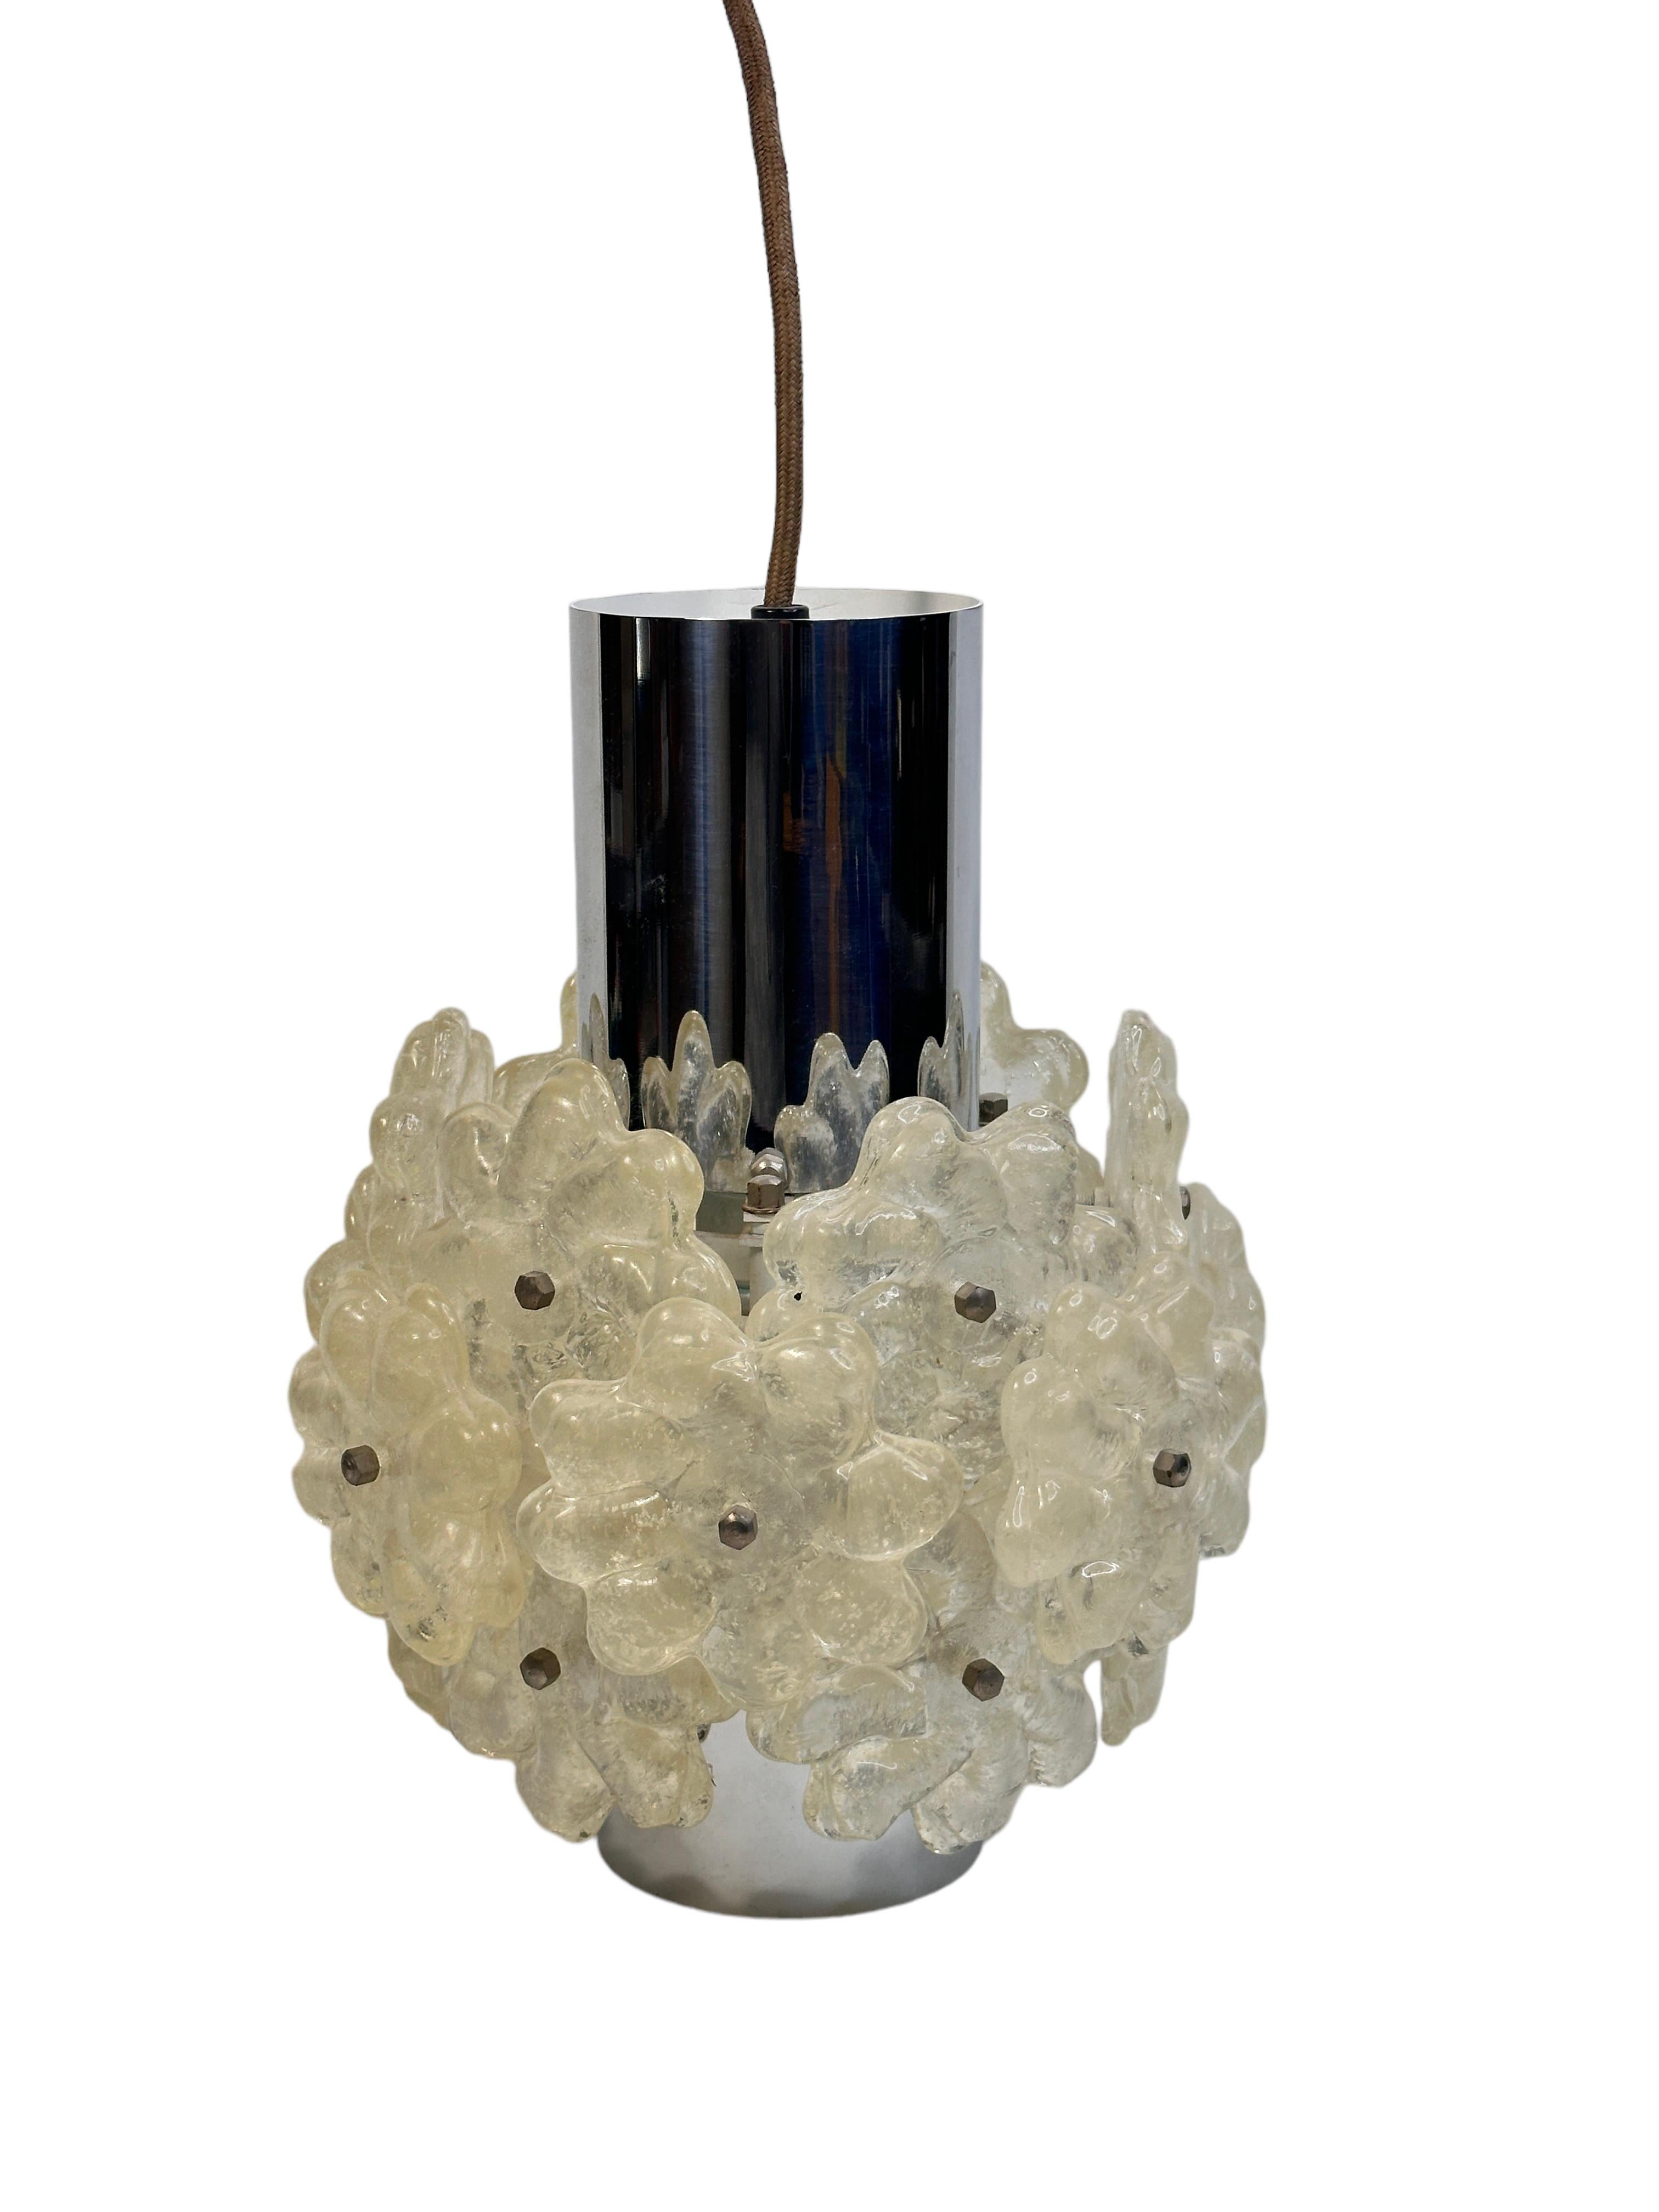 1 of 6 Chrome Pendant Fixture with Lucite Flower Clusters by Kalmar Austria 1960 For Sale 6